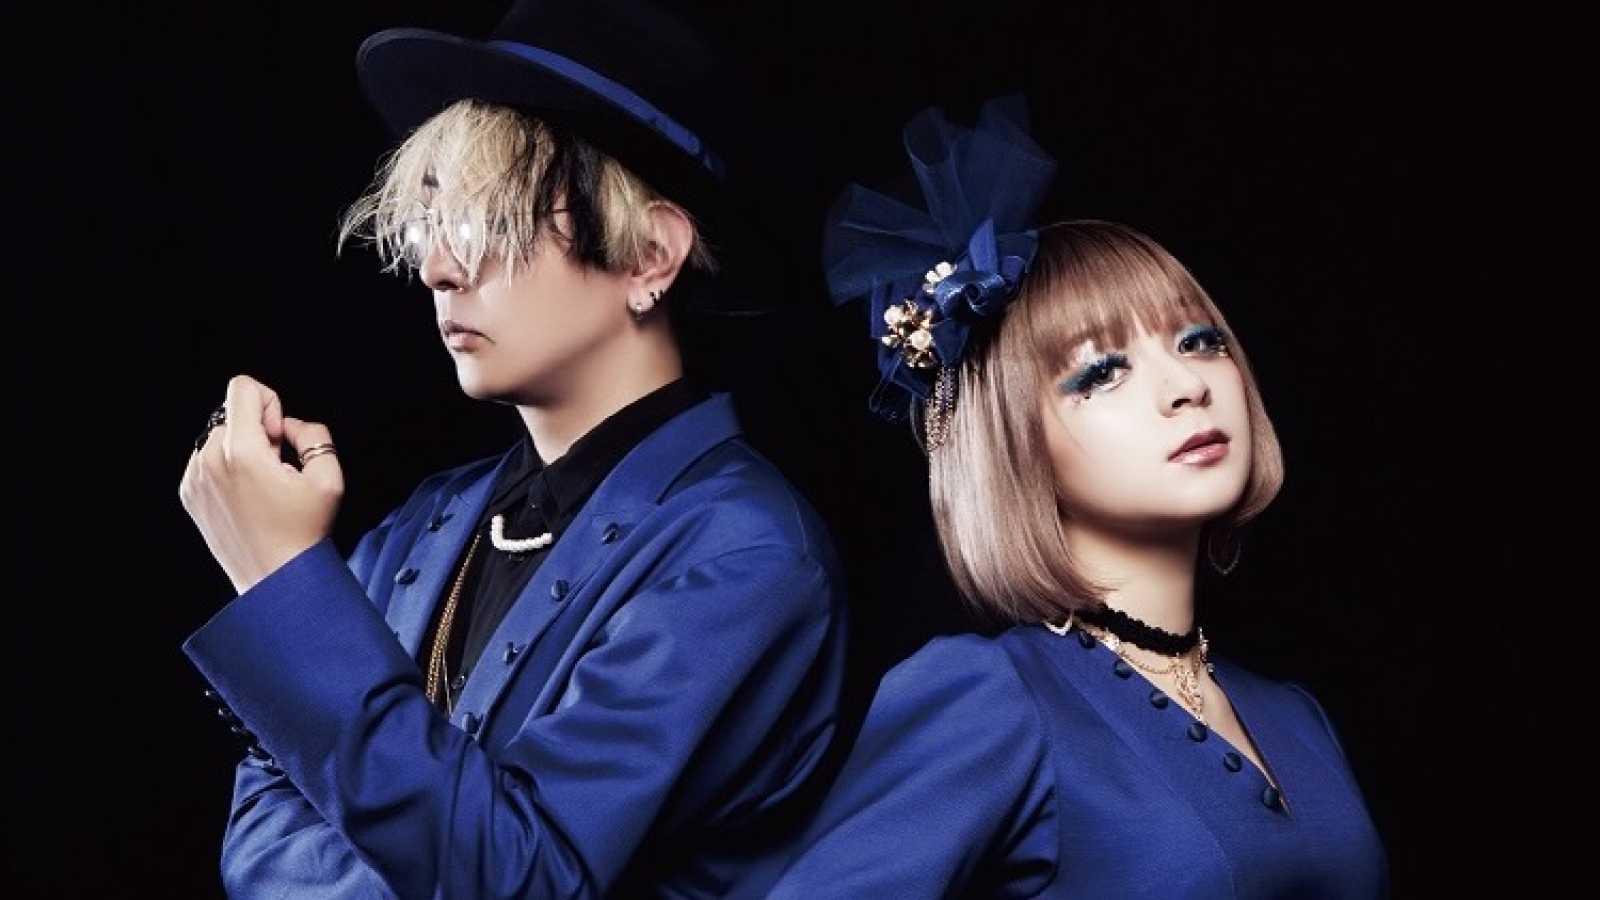 New Cover Album from GARNiDELiA © GARNiDELiA. All rights reserved